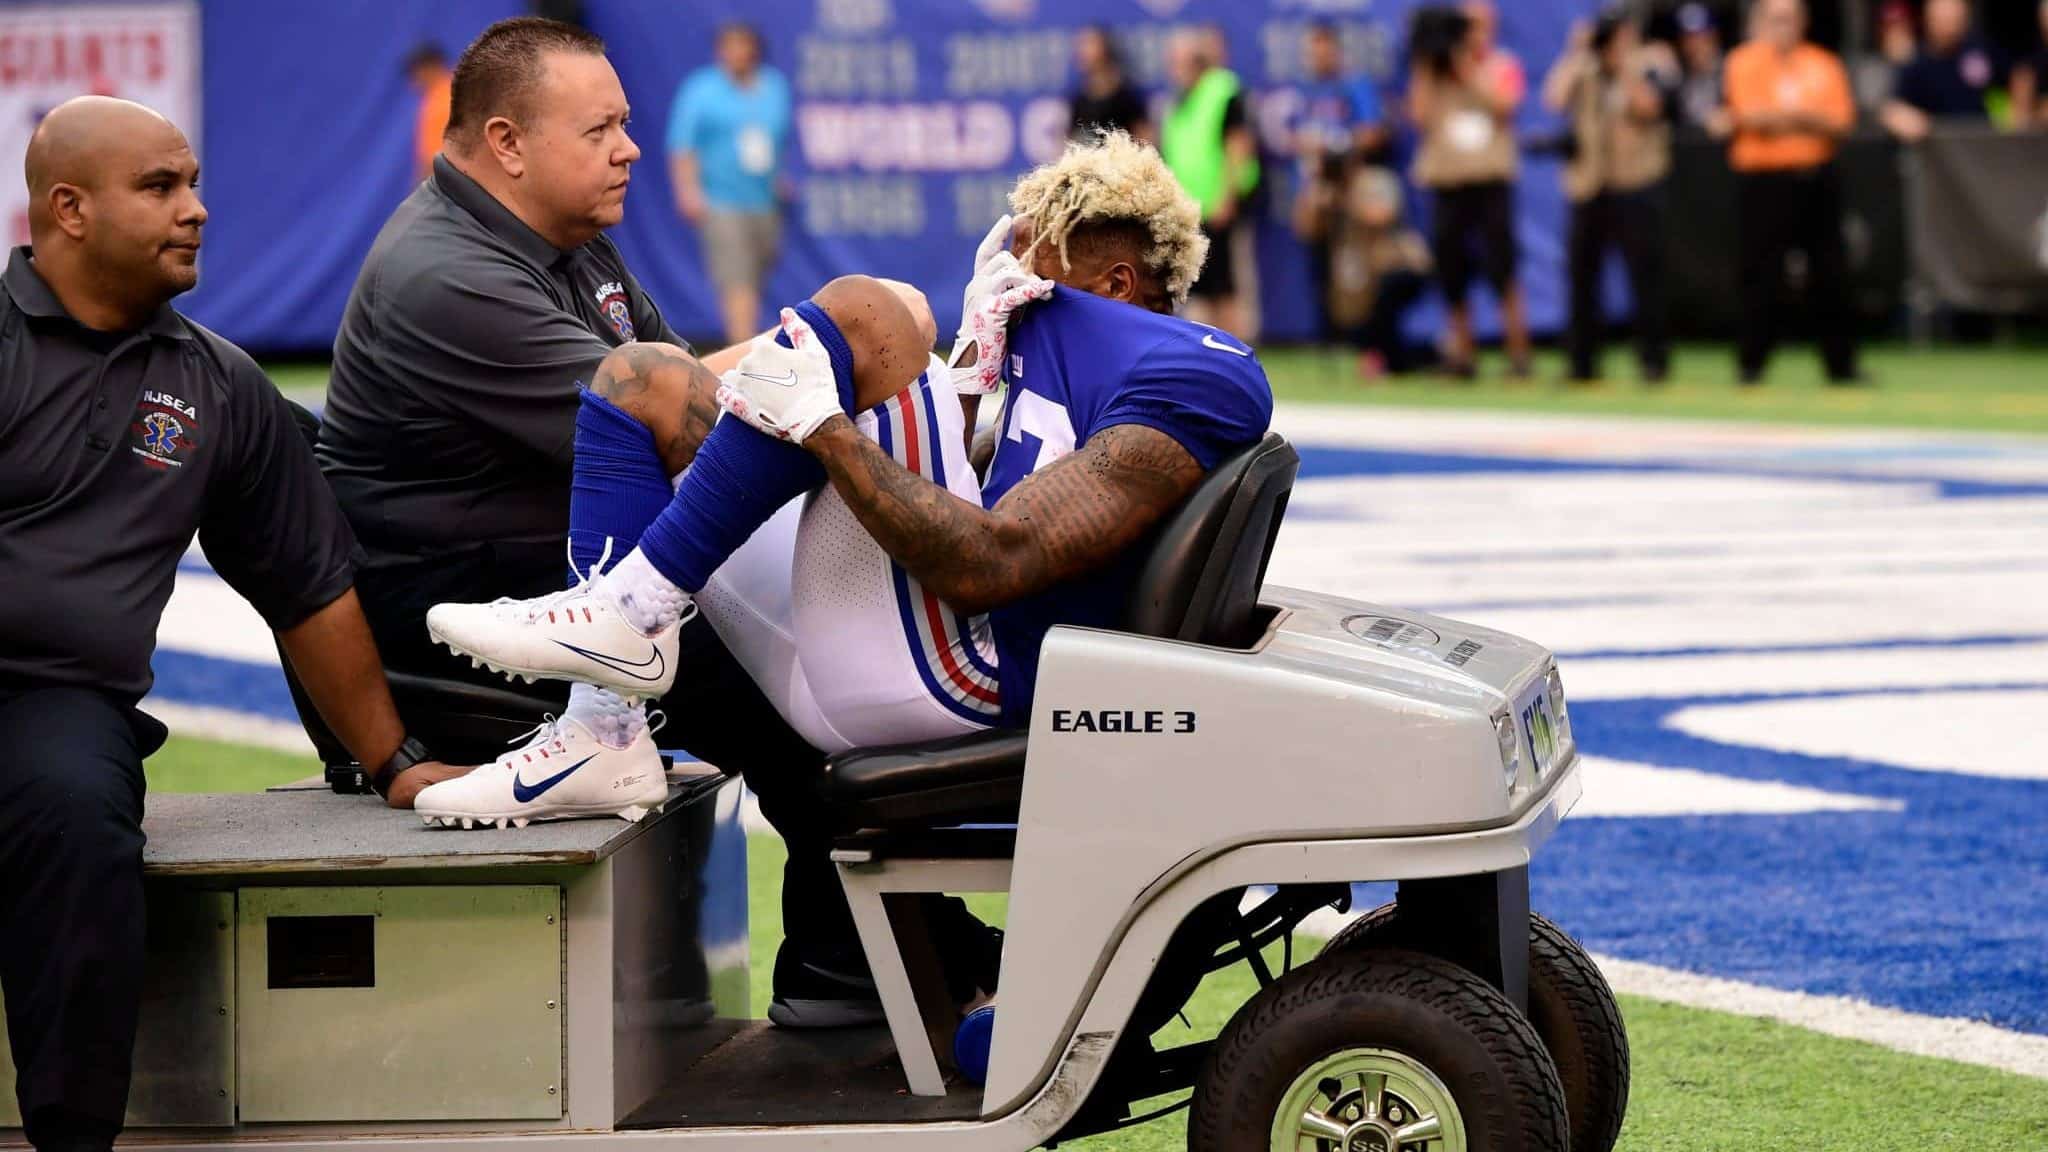 EAST RUTHERFORD, NJ - OCTOBER 08: Odell Beckham #13 of the New York Giants is carted off the field after sustaining an injury during the fourth quarter against the Los Angeles Chargers during an NFL game at MetLife Stadium on October 8, 2017 in East Rutherford, New Jersey. The Los Angeles Chargers defeated the New York Giants 27-22.